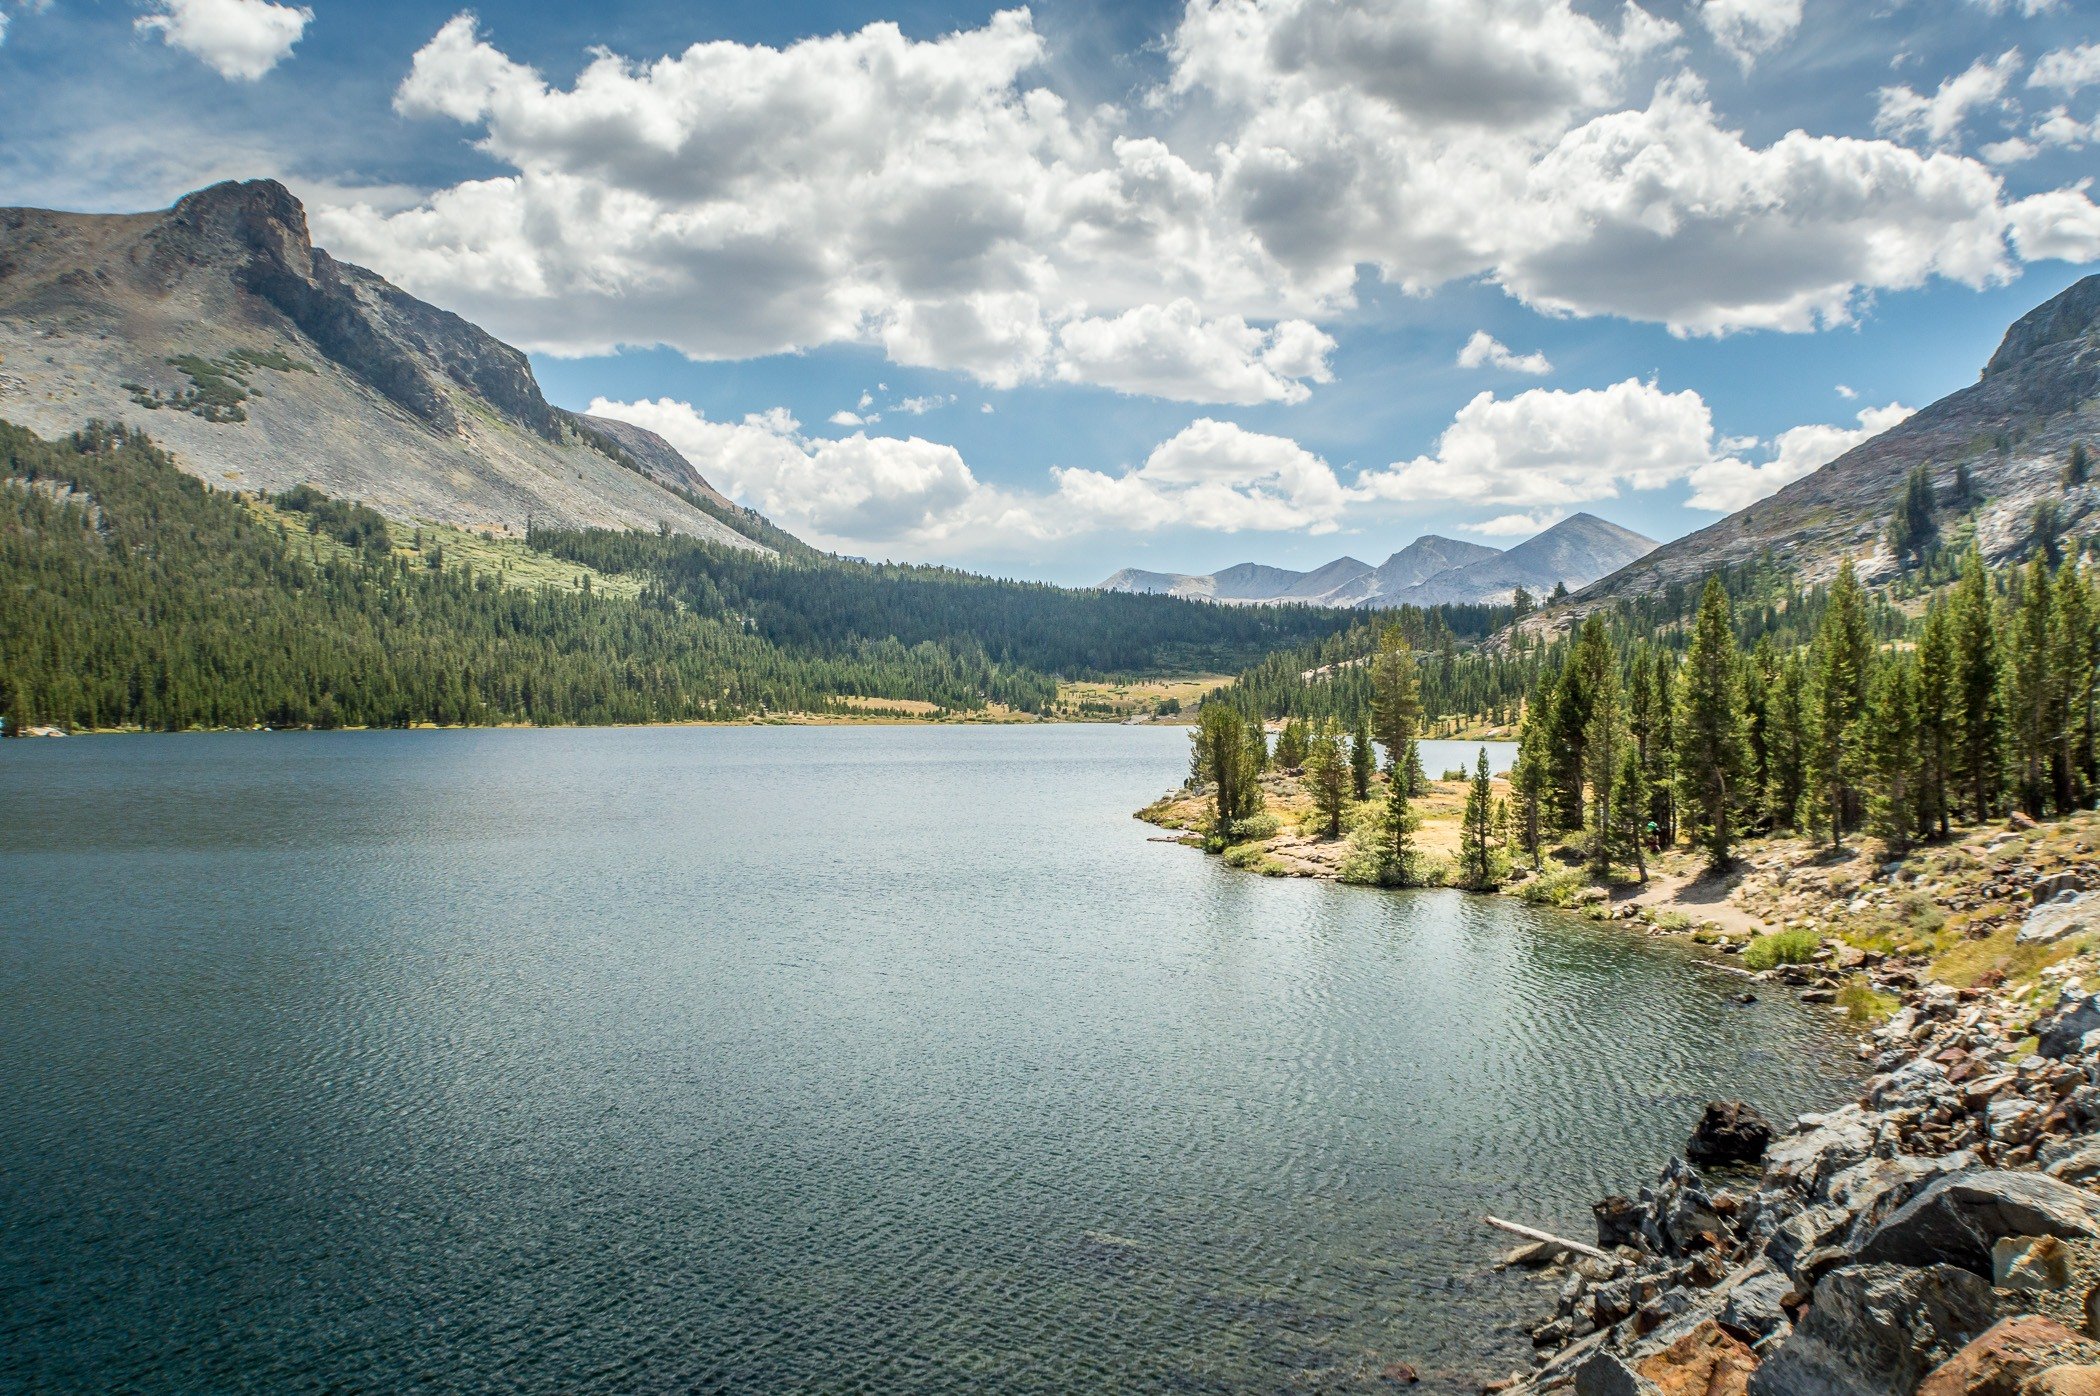 View of Ellery Lake on the Tioga Pass